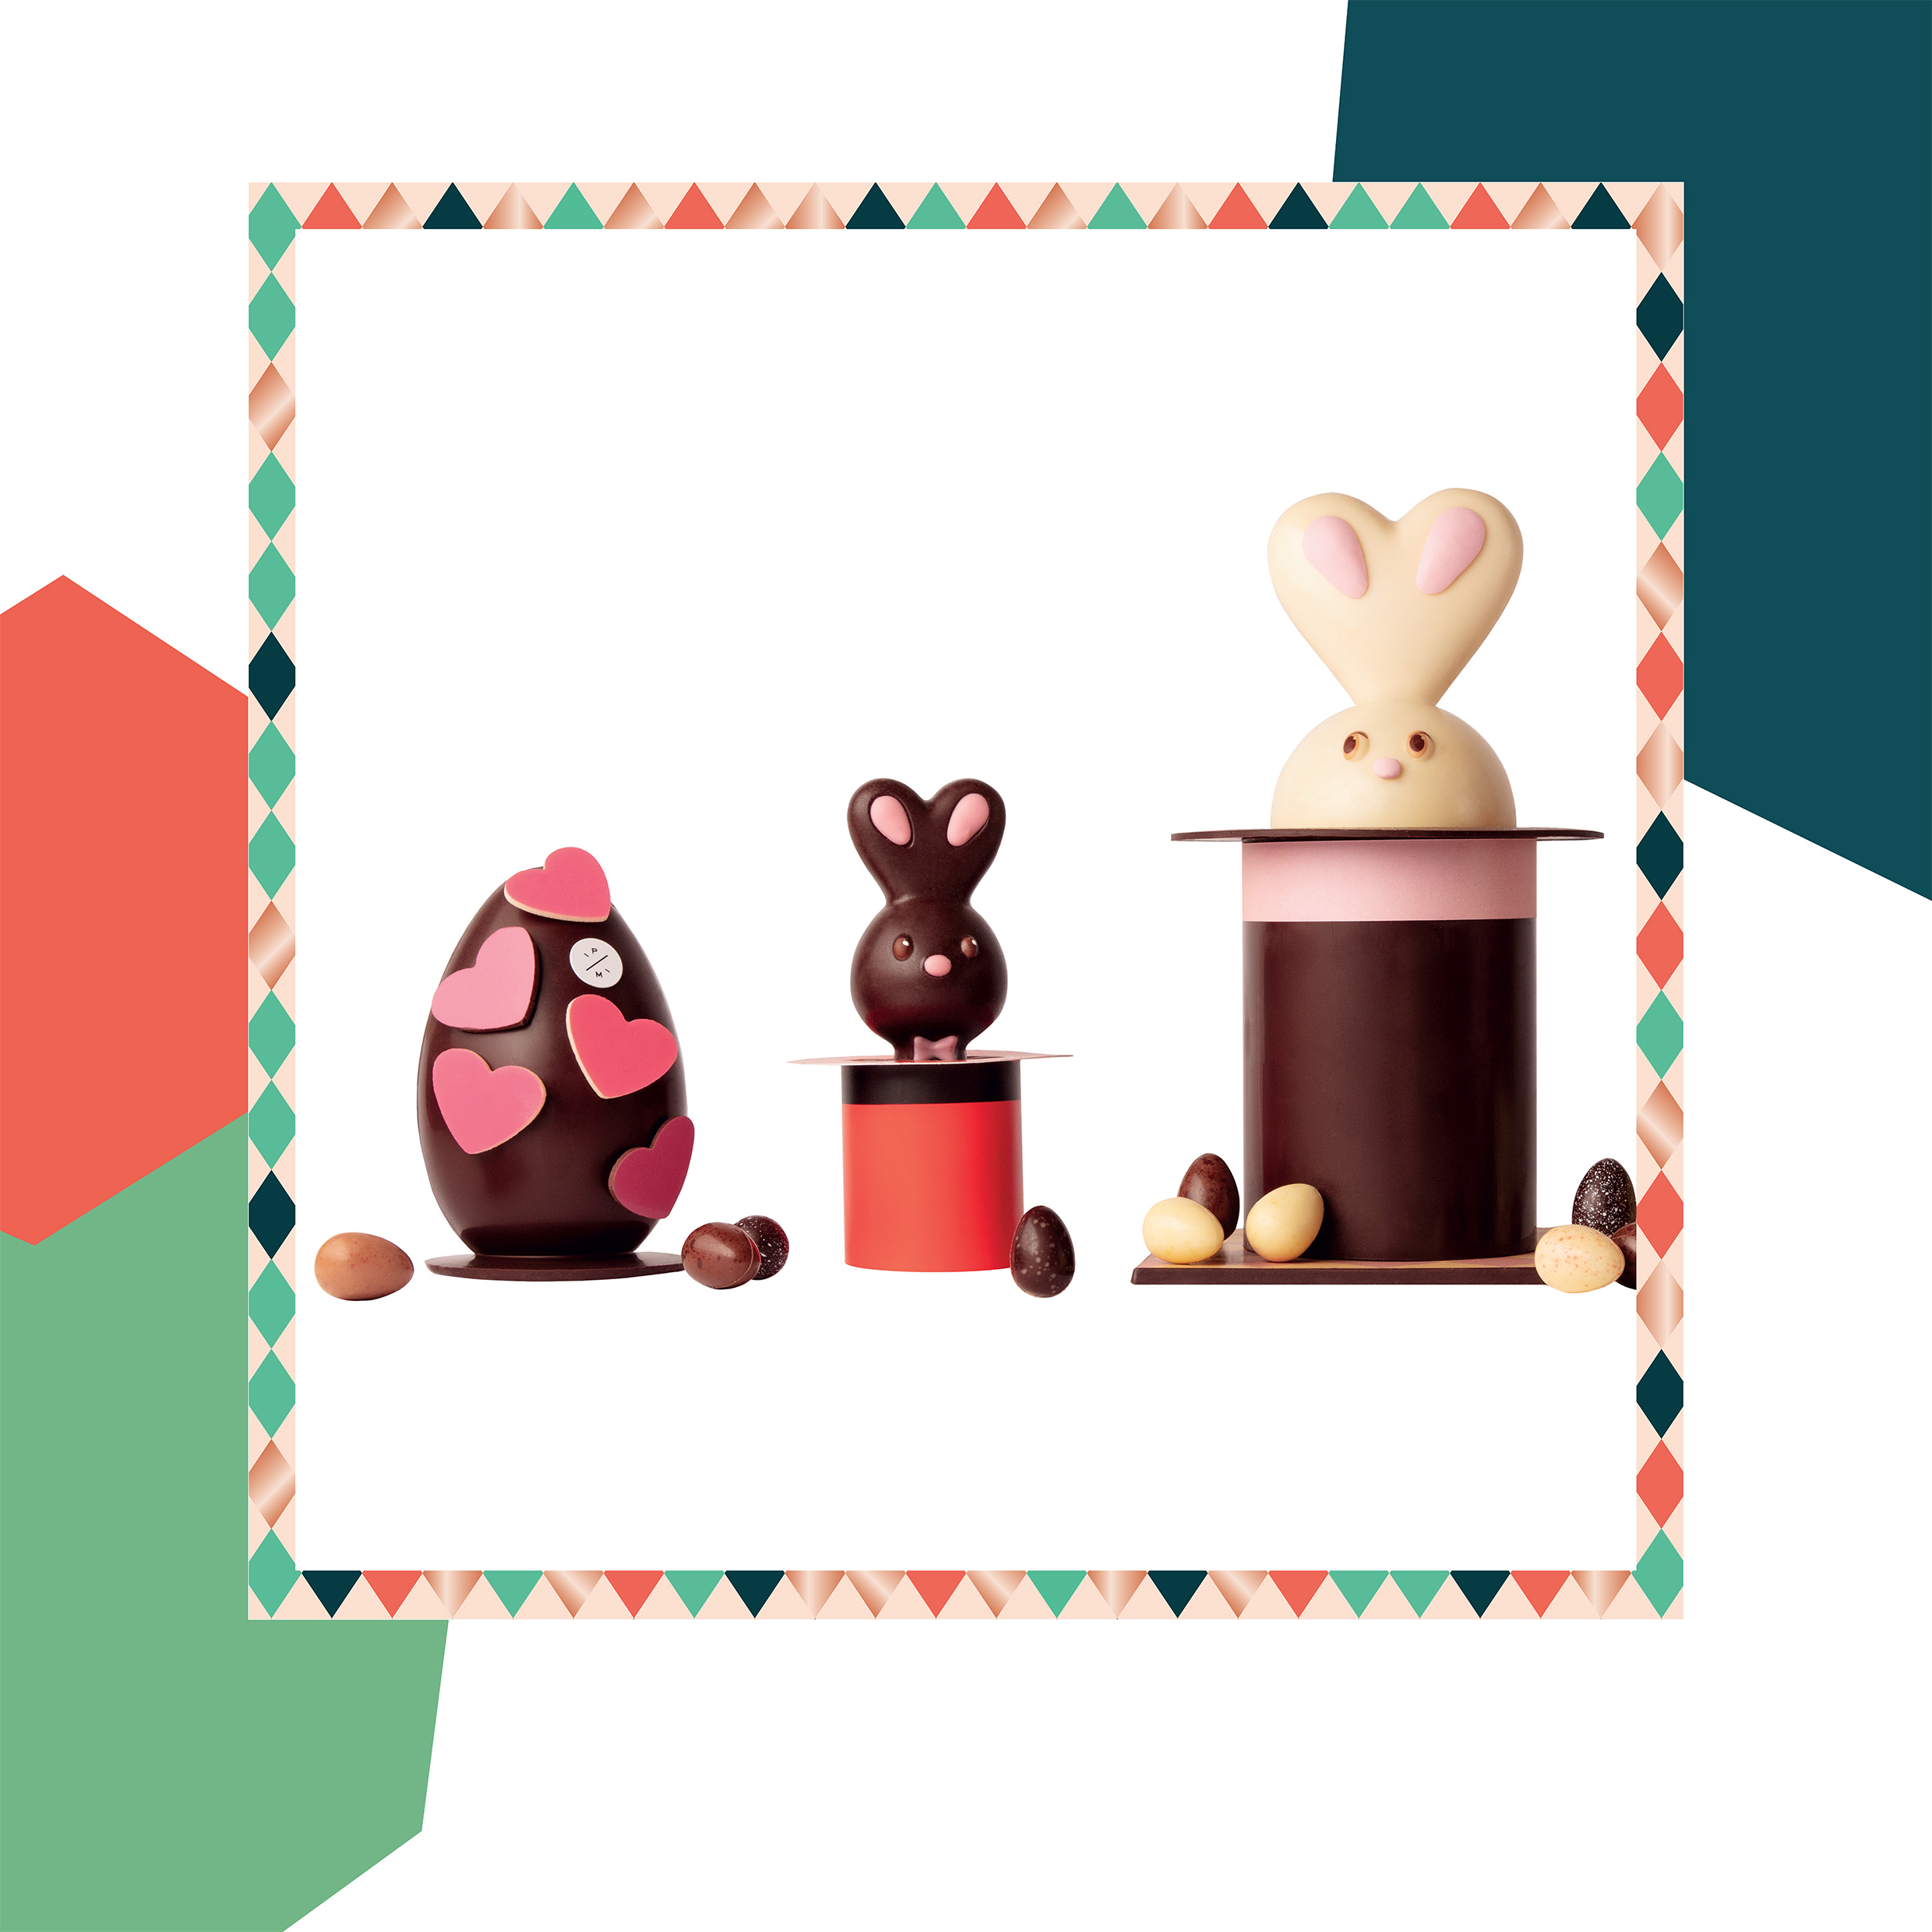 Pierre Marcolini, Easter, Easter Holidays, Chocolate Eggs, Chocolate Bunnies